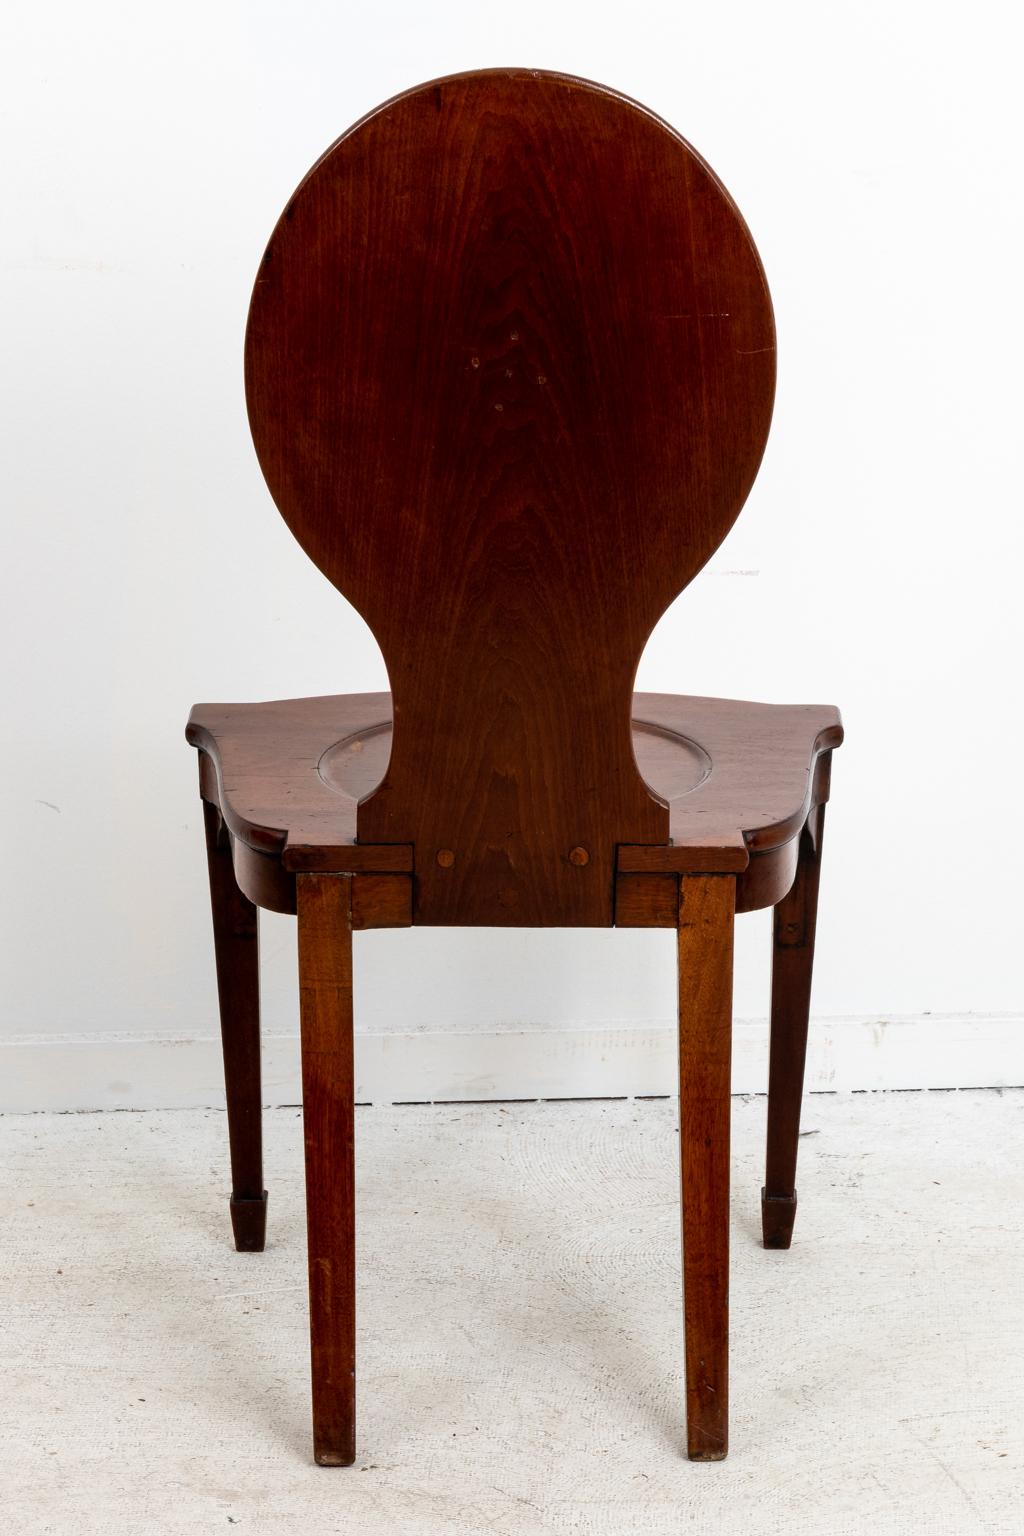 Pair of Victorian mahogany hall chairs with oval seat back, plain tapered legs, and spade turned feet. Please note of wear consistent with age including minor scratches and finish loss.